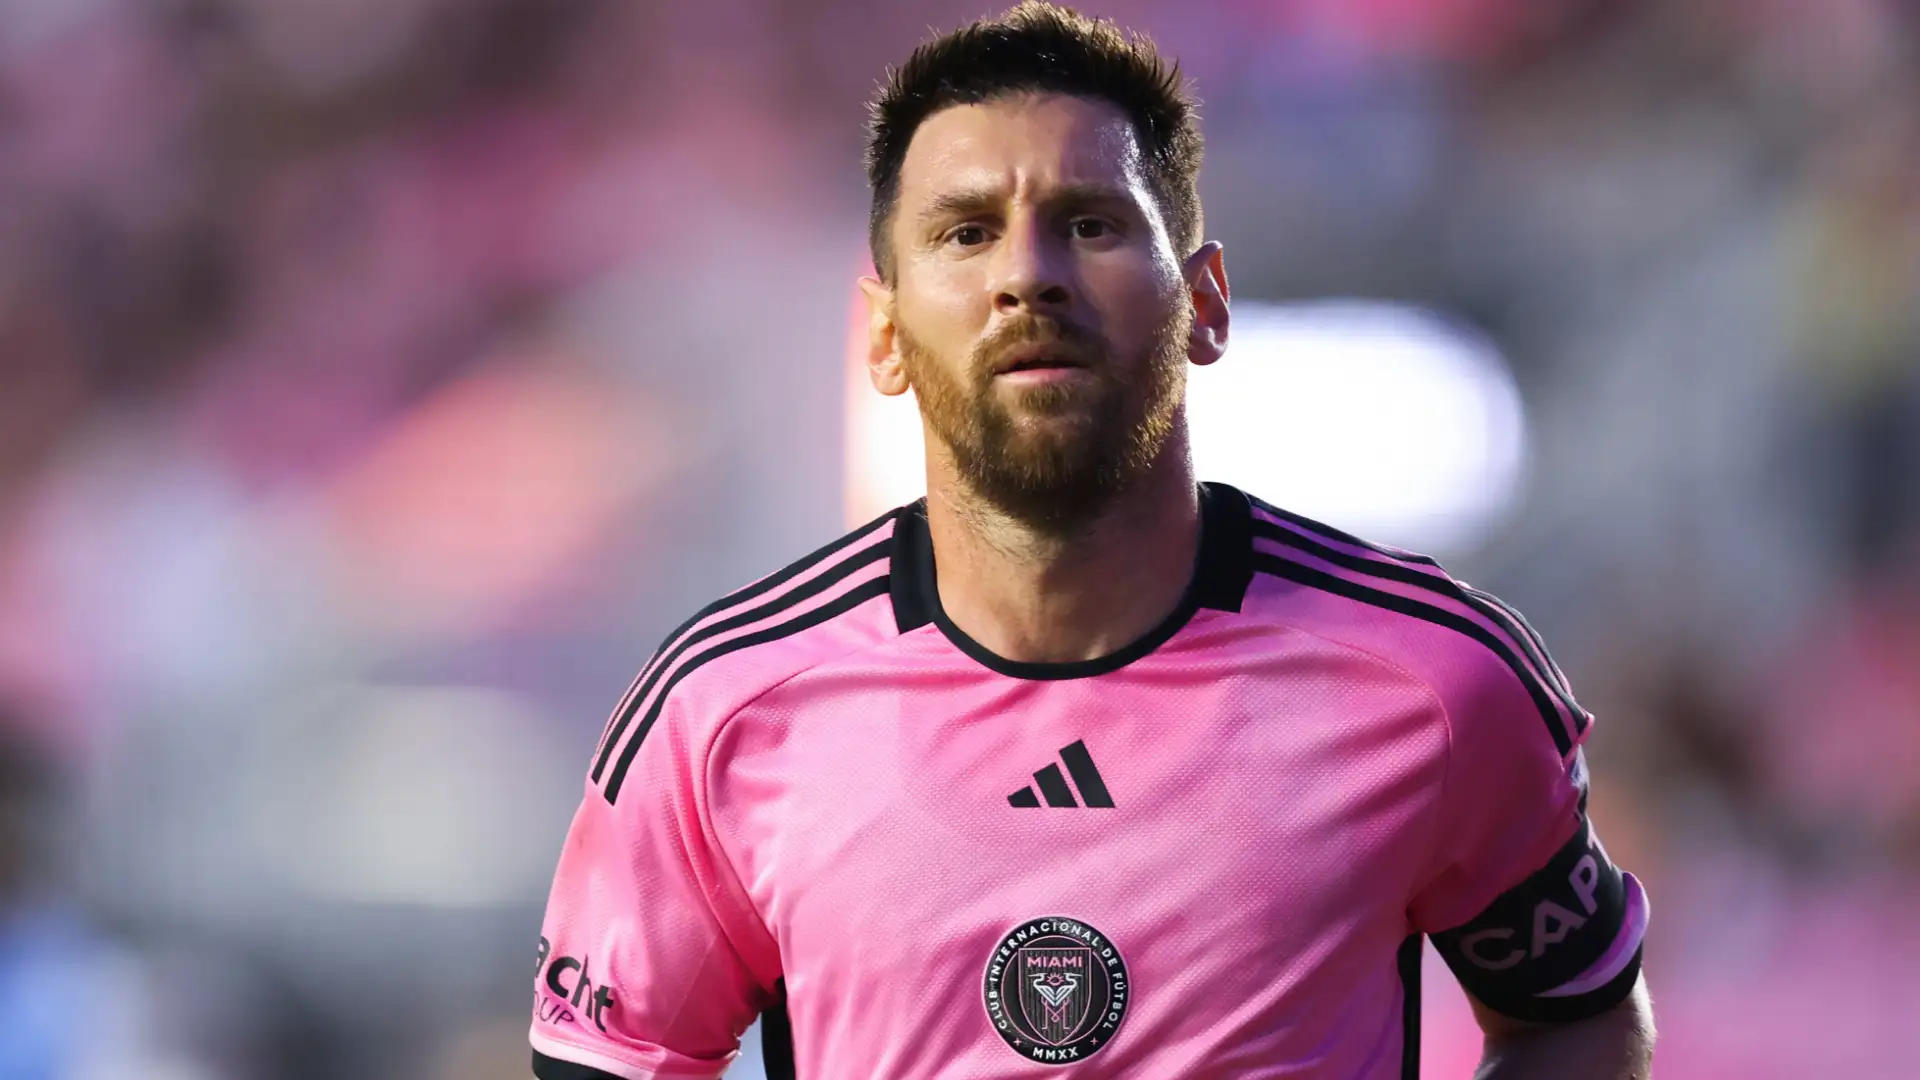 Lionel Messi sees remarkable three-year goal sequence snapped! Inter Miami defeat ends run that covered entire spell at PSG & trophy-winning start to life in MLS